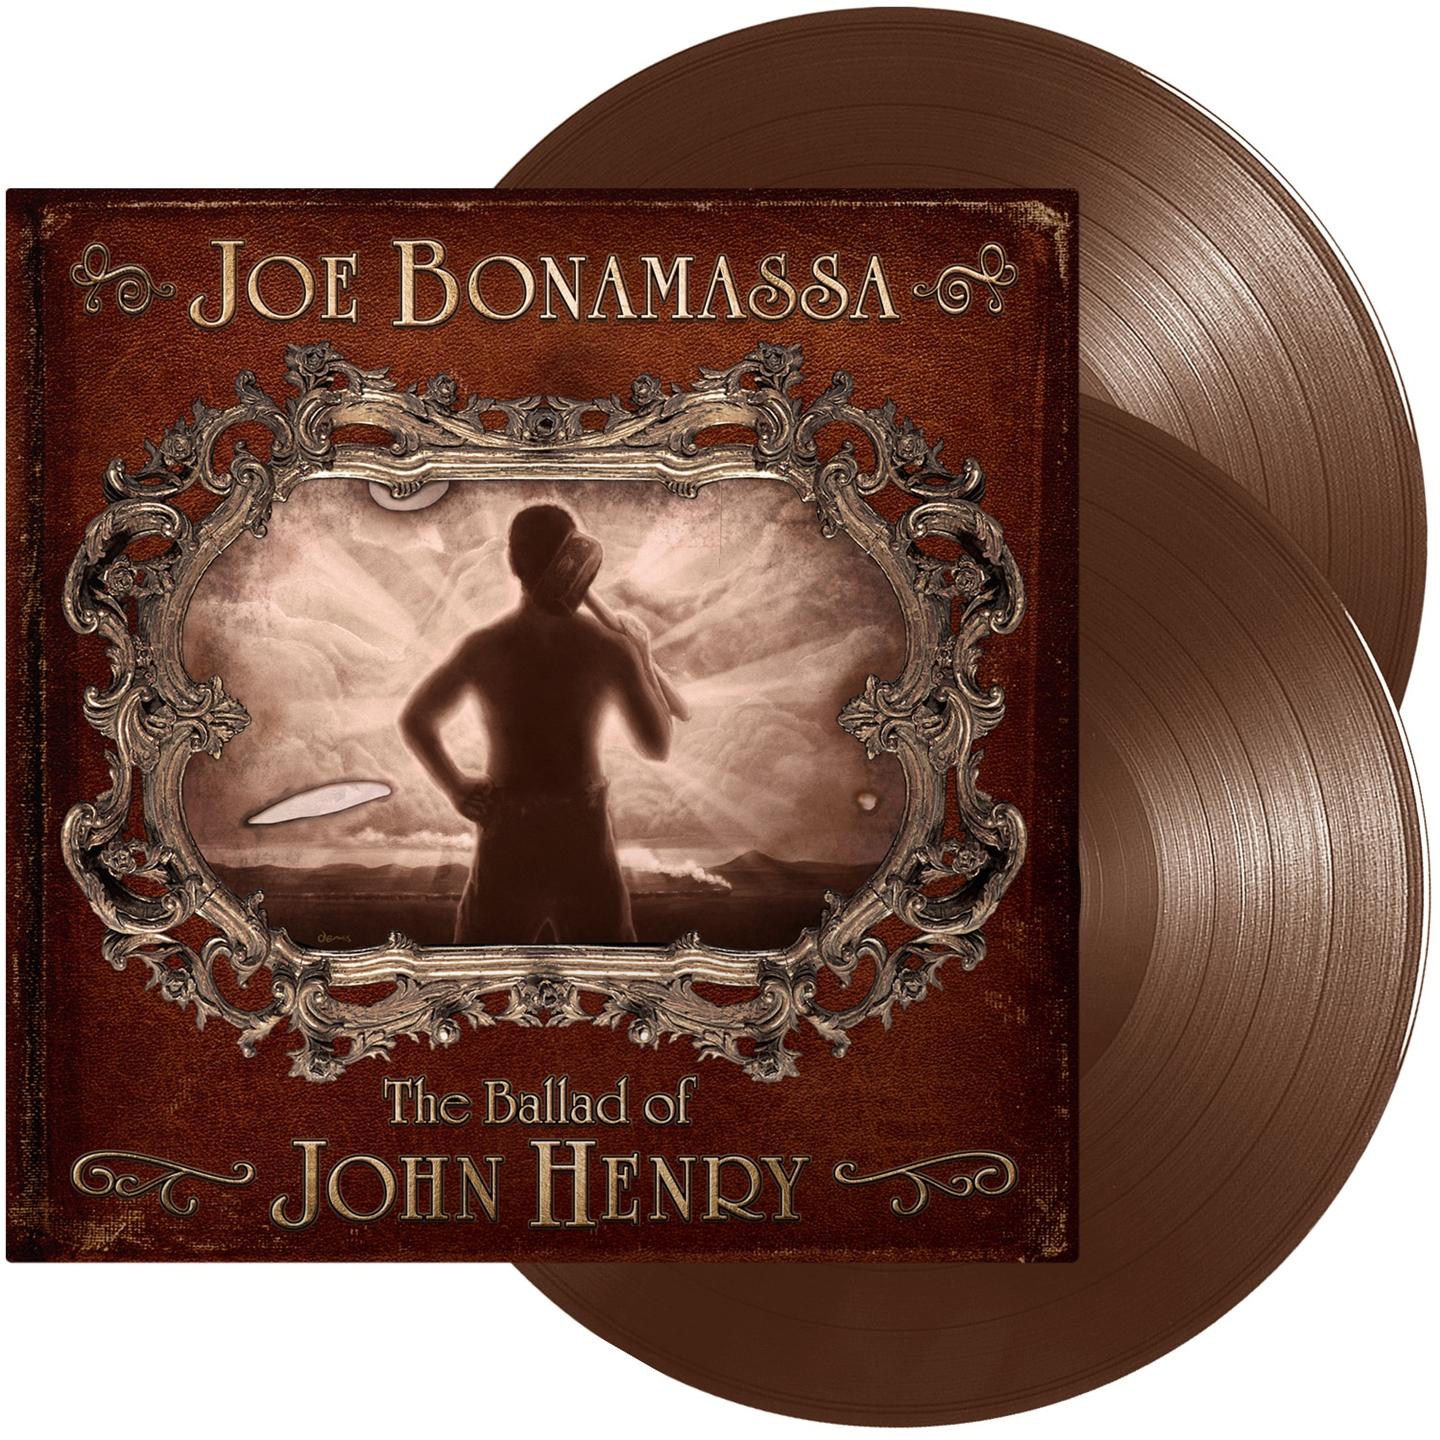 THE BALLAD OF JOHN HENRY [2 LPS RE-ISSUE ON BROWN VINYL]